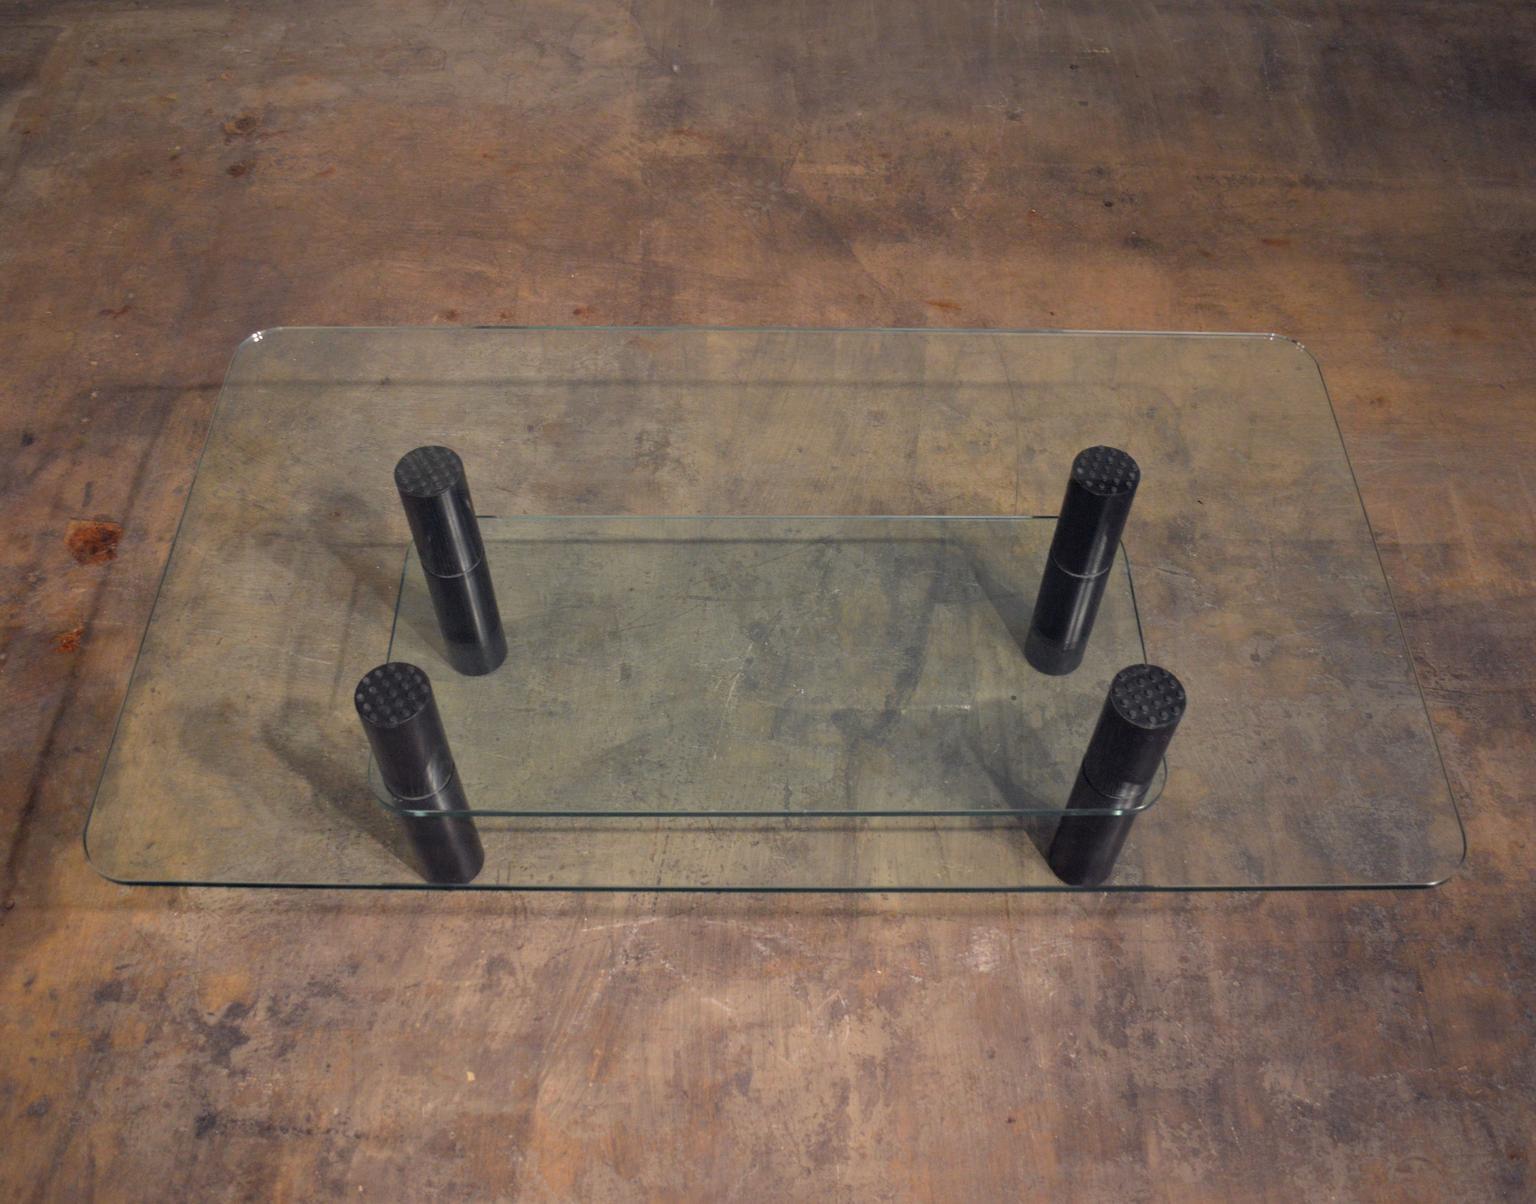 Beveled Alessi Post-Modern Glass, Wood, and Rubber Coffee Table c. 1980's For Sale